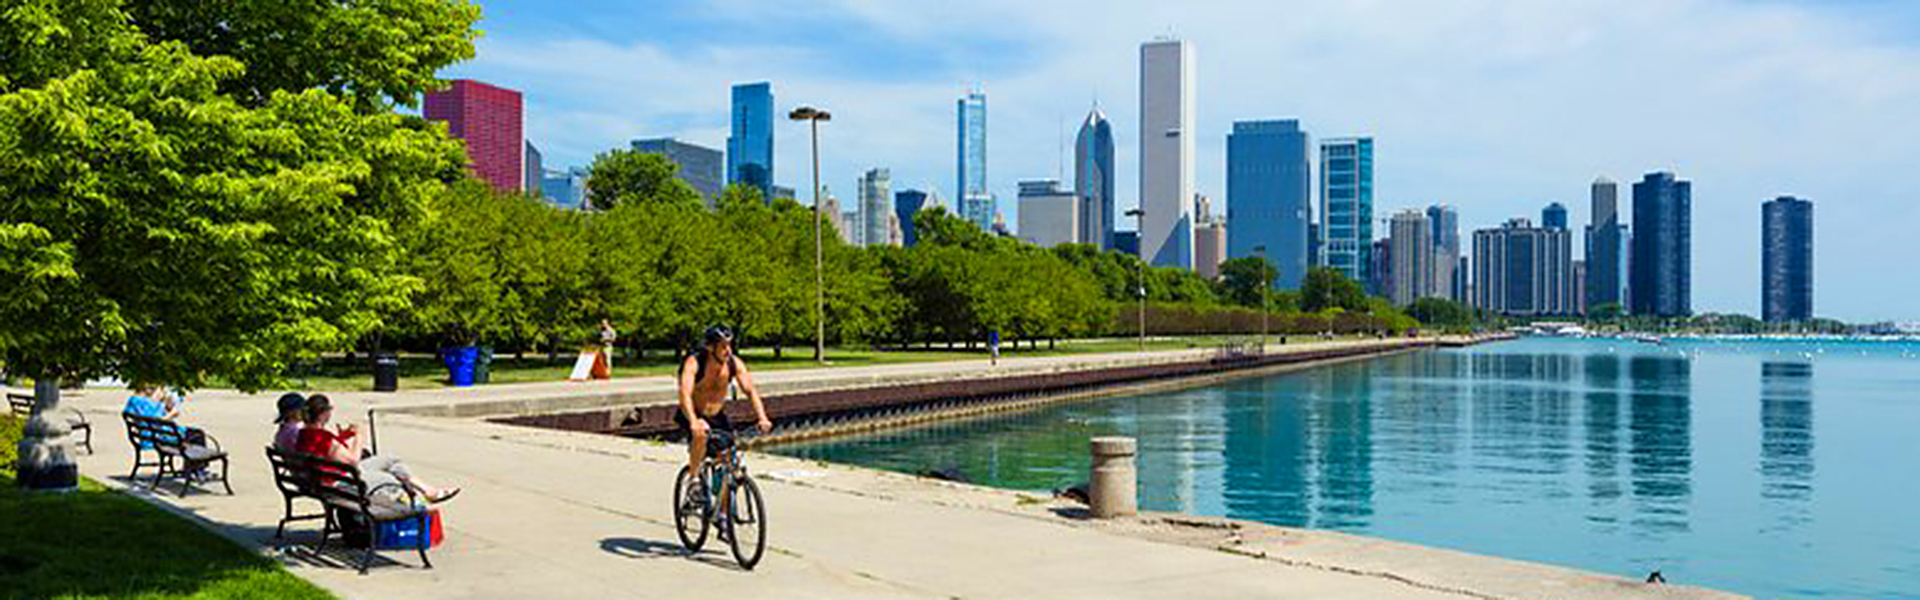 Cyclists in Chicago's Lakefront Trail